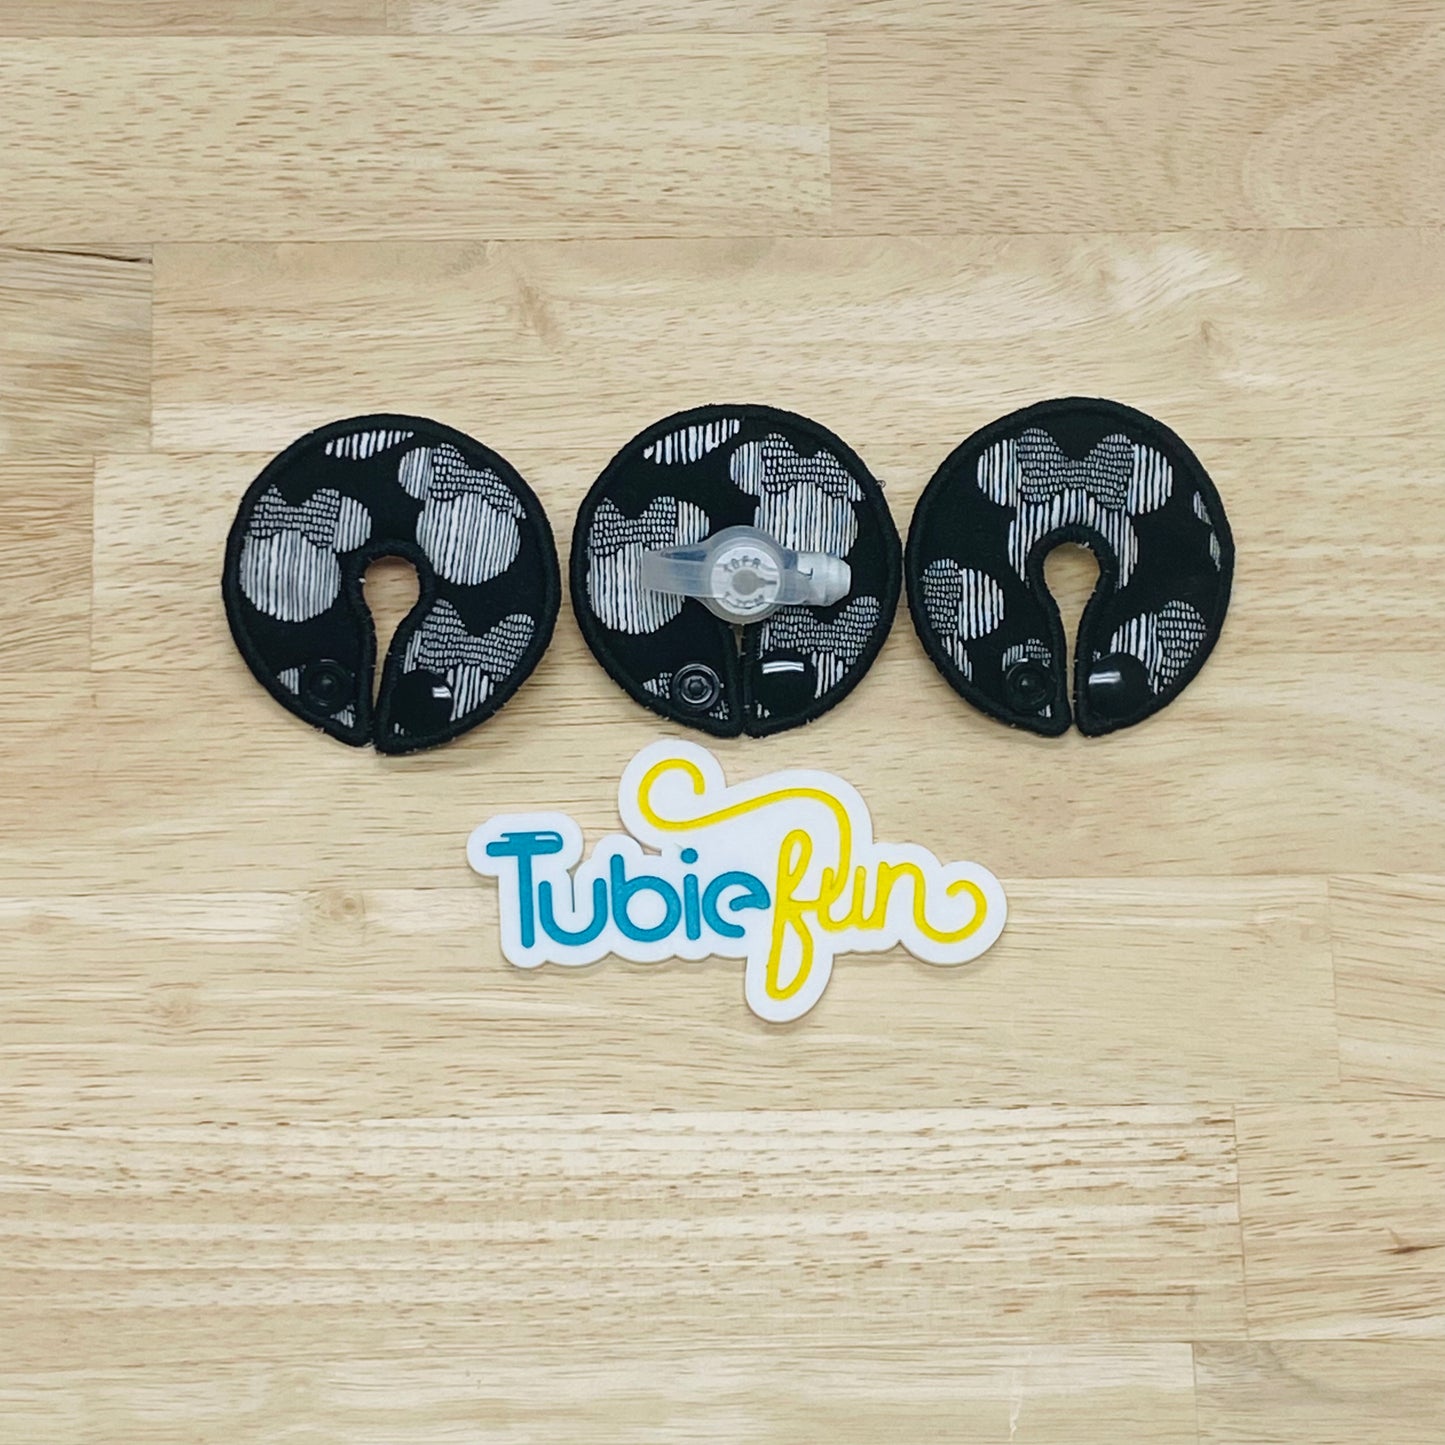 G-Tube Button Pad Cover - Black and White Mouse with Bow